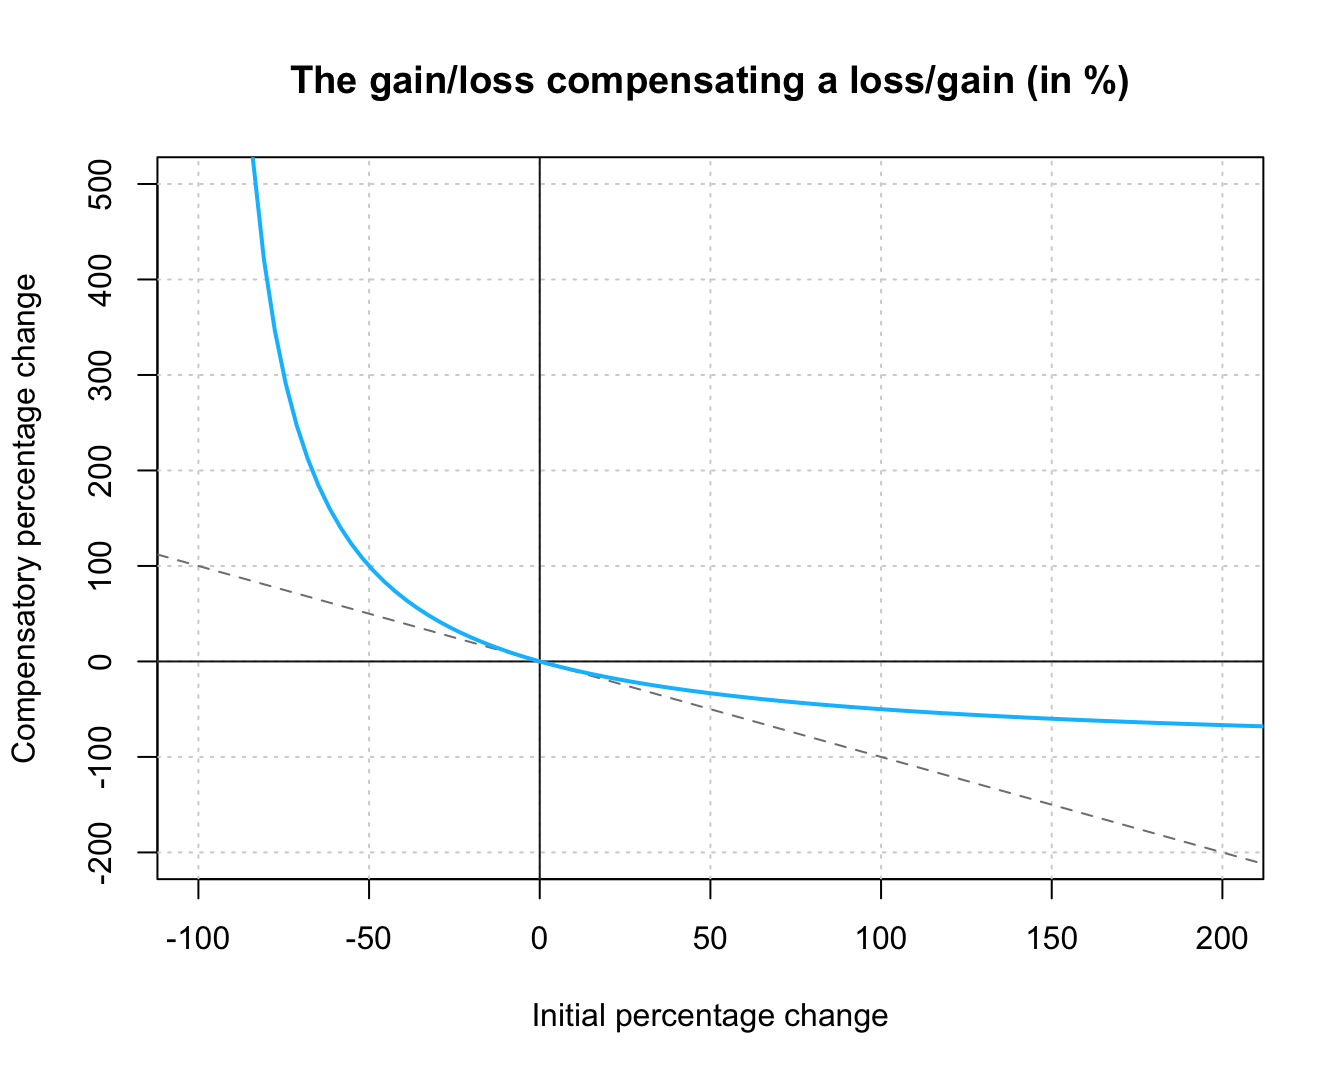 The percentage gain/loss required for recovering a loss/gain of x%.